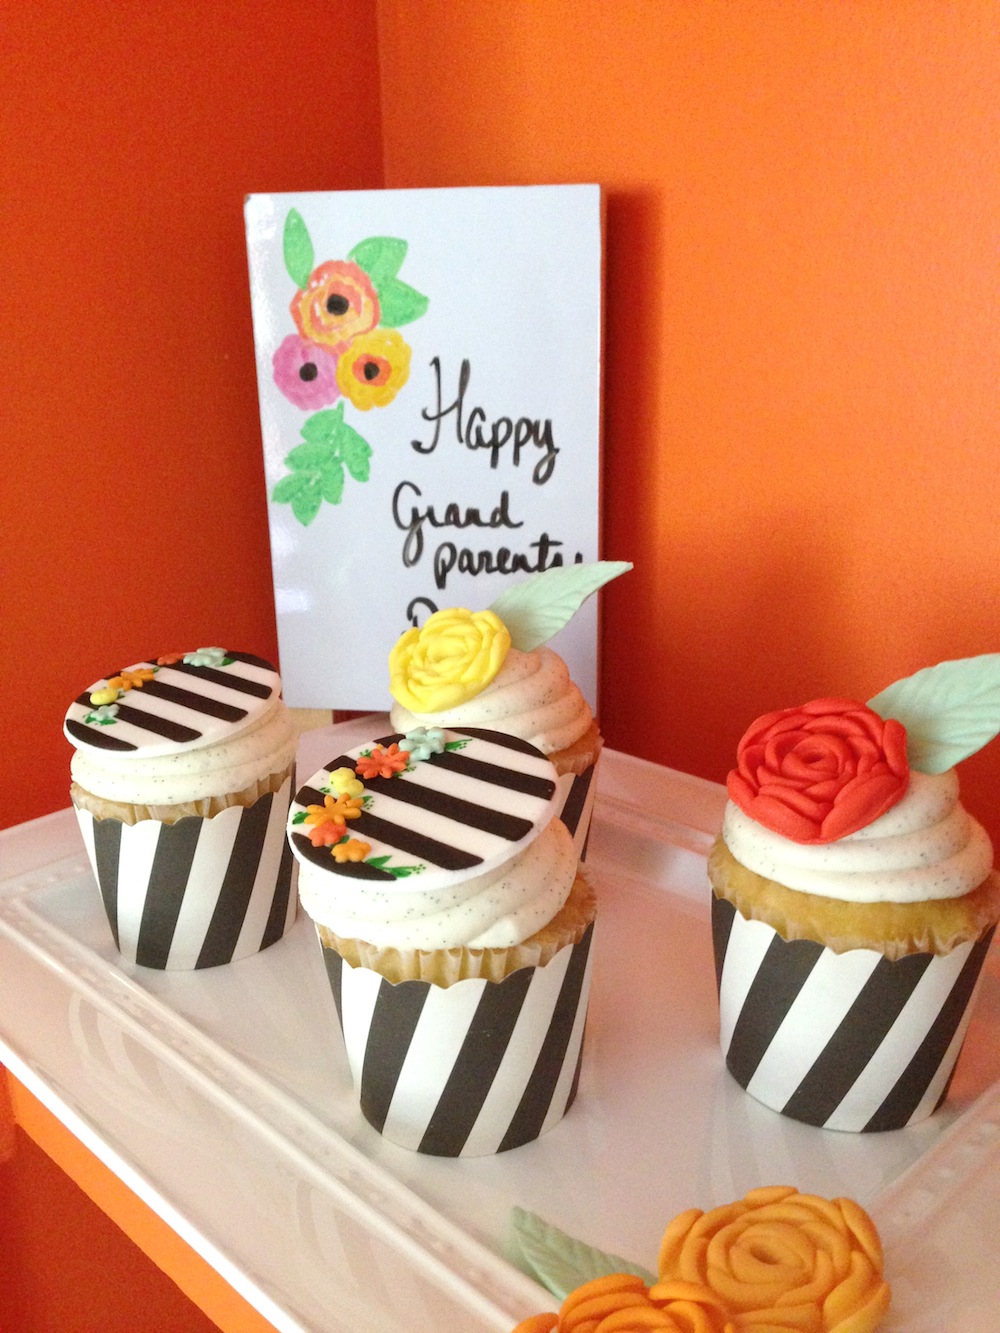 grandparents-day-styled-photo-shoot-cupcakes.jpg